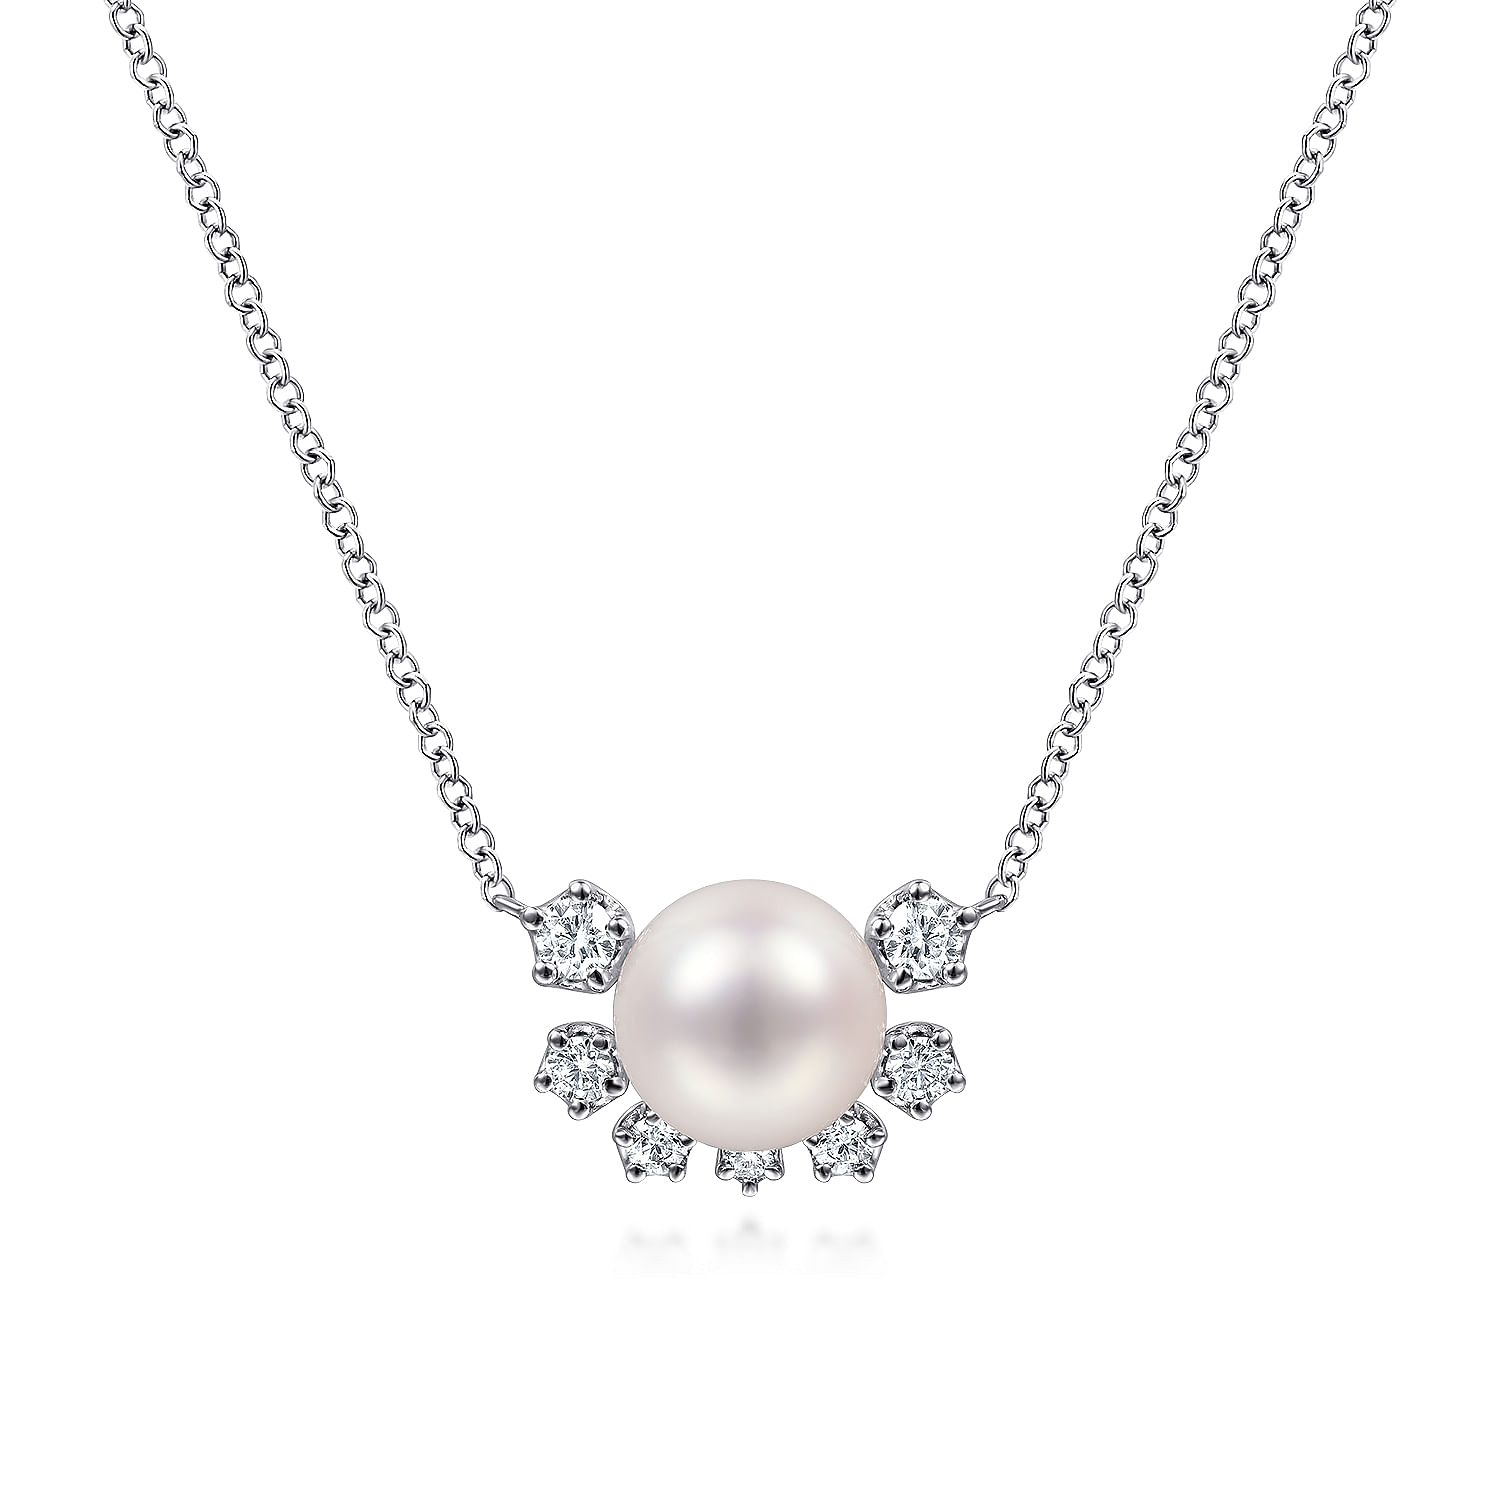 Gabriel - 14K White Gold Round Pearl Pendant Necklace with Diamond Accents